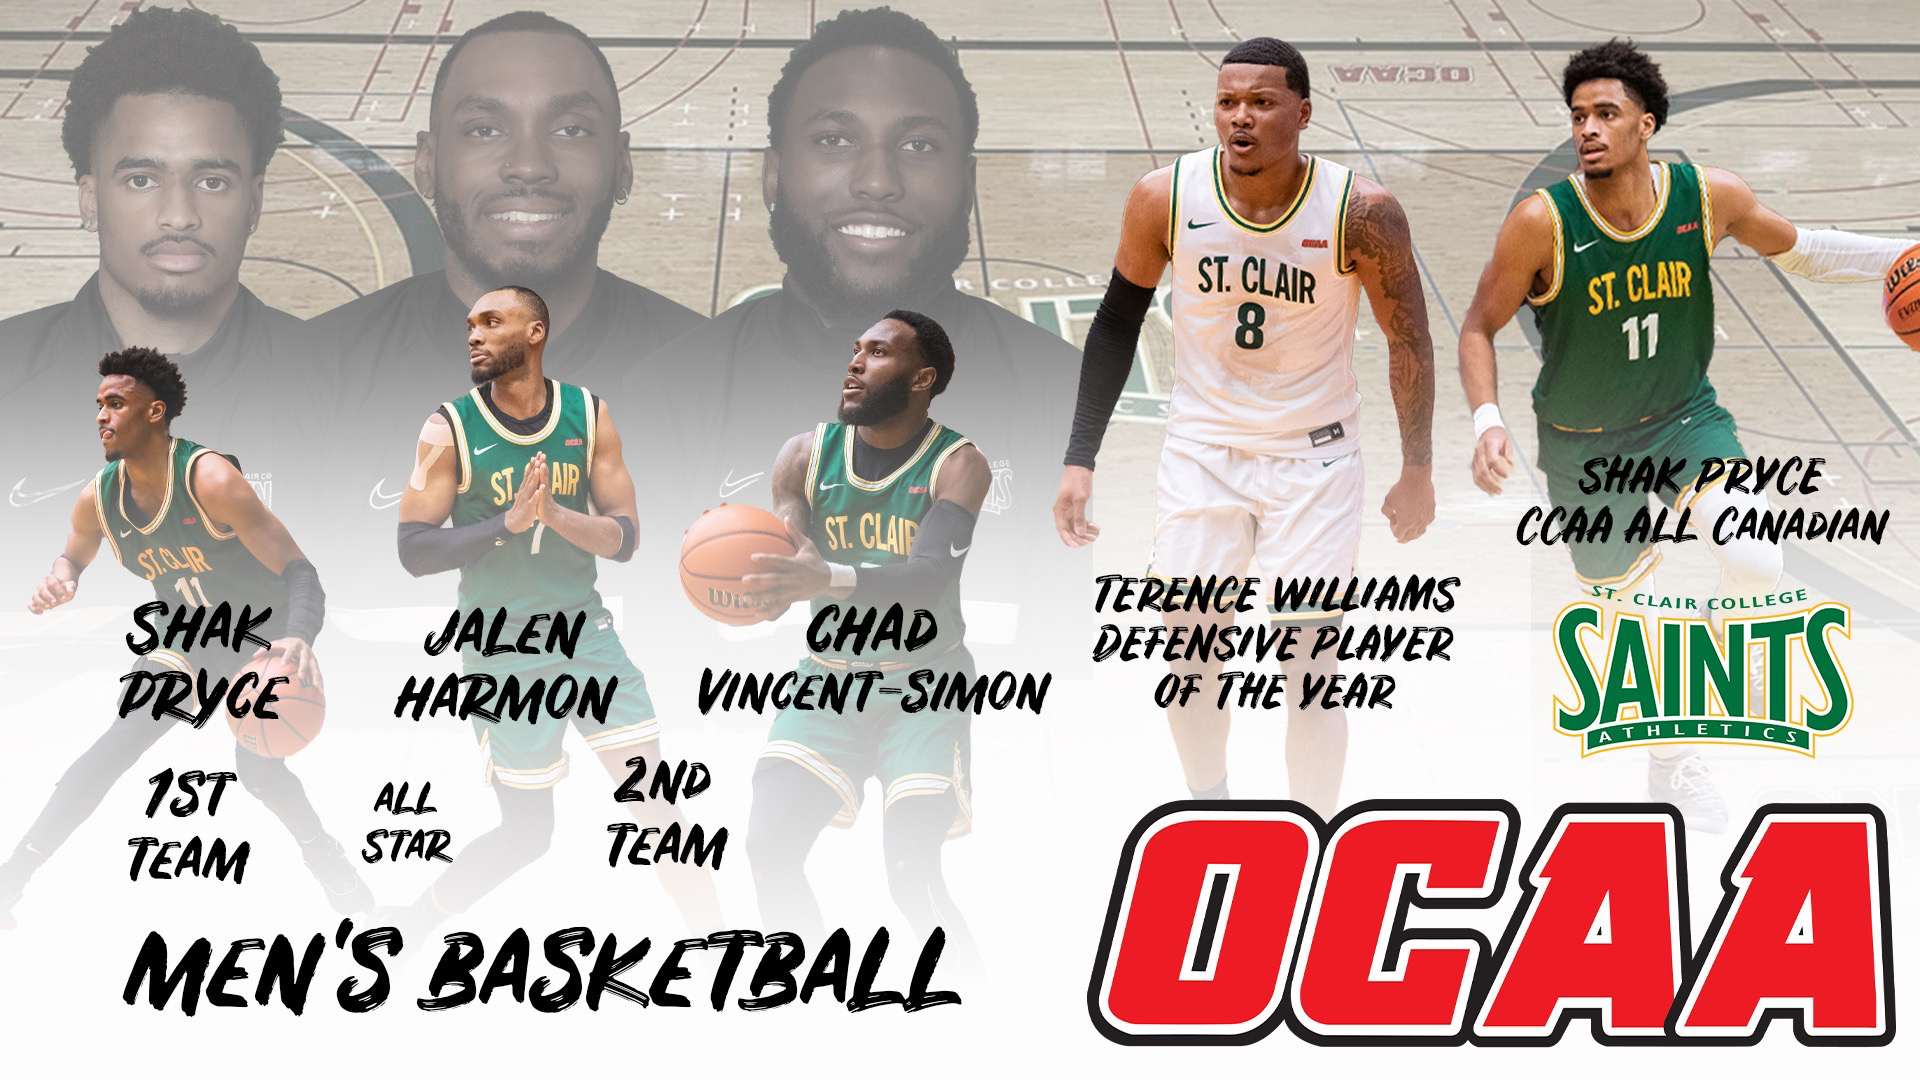 St. Clair Men’s Basketball Well Represented in OCAA Awards